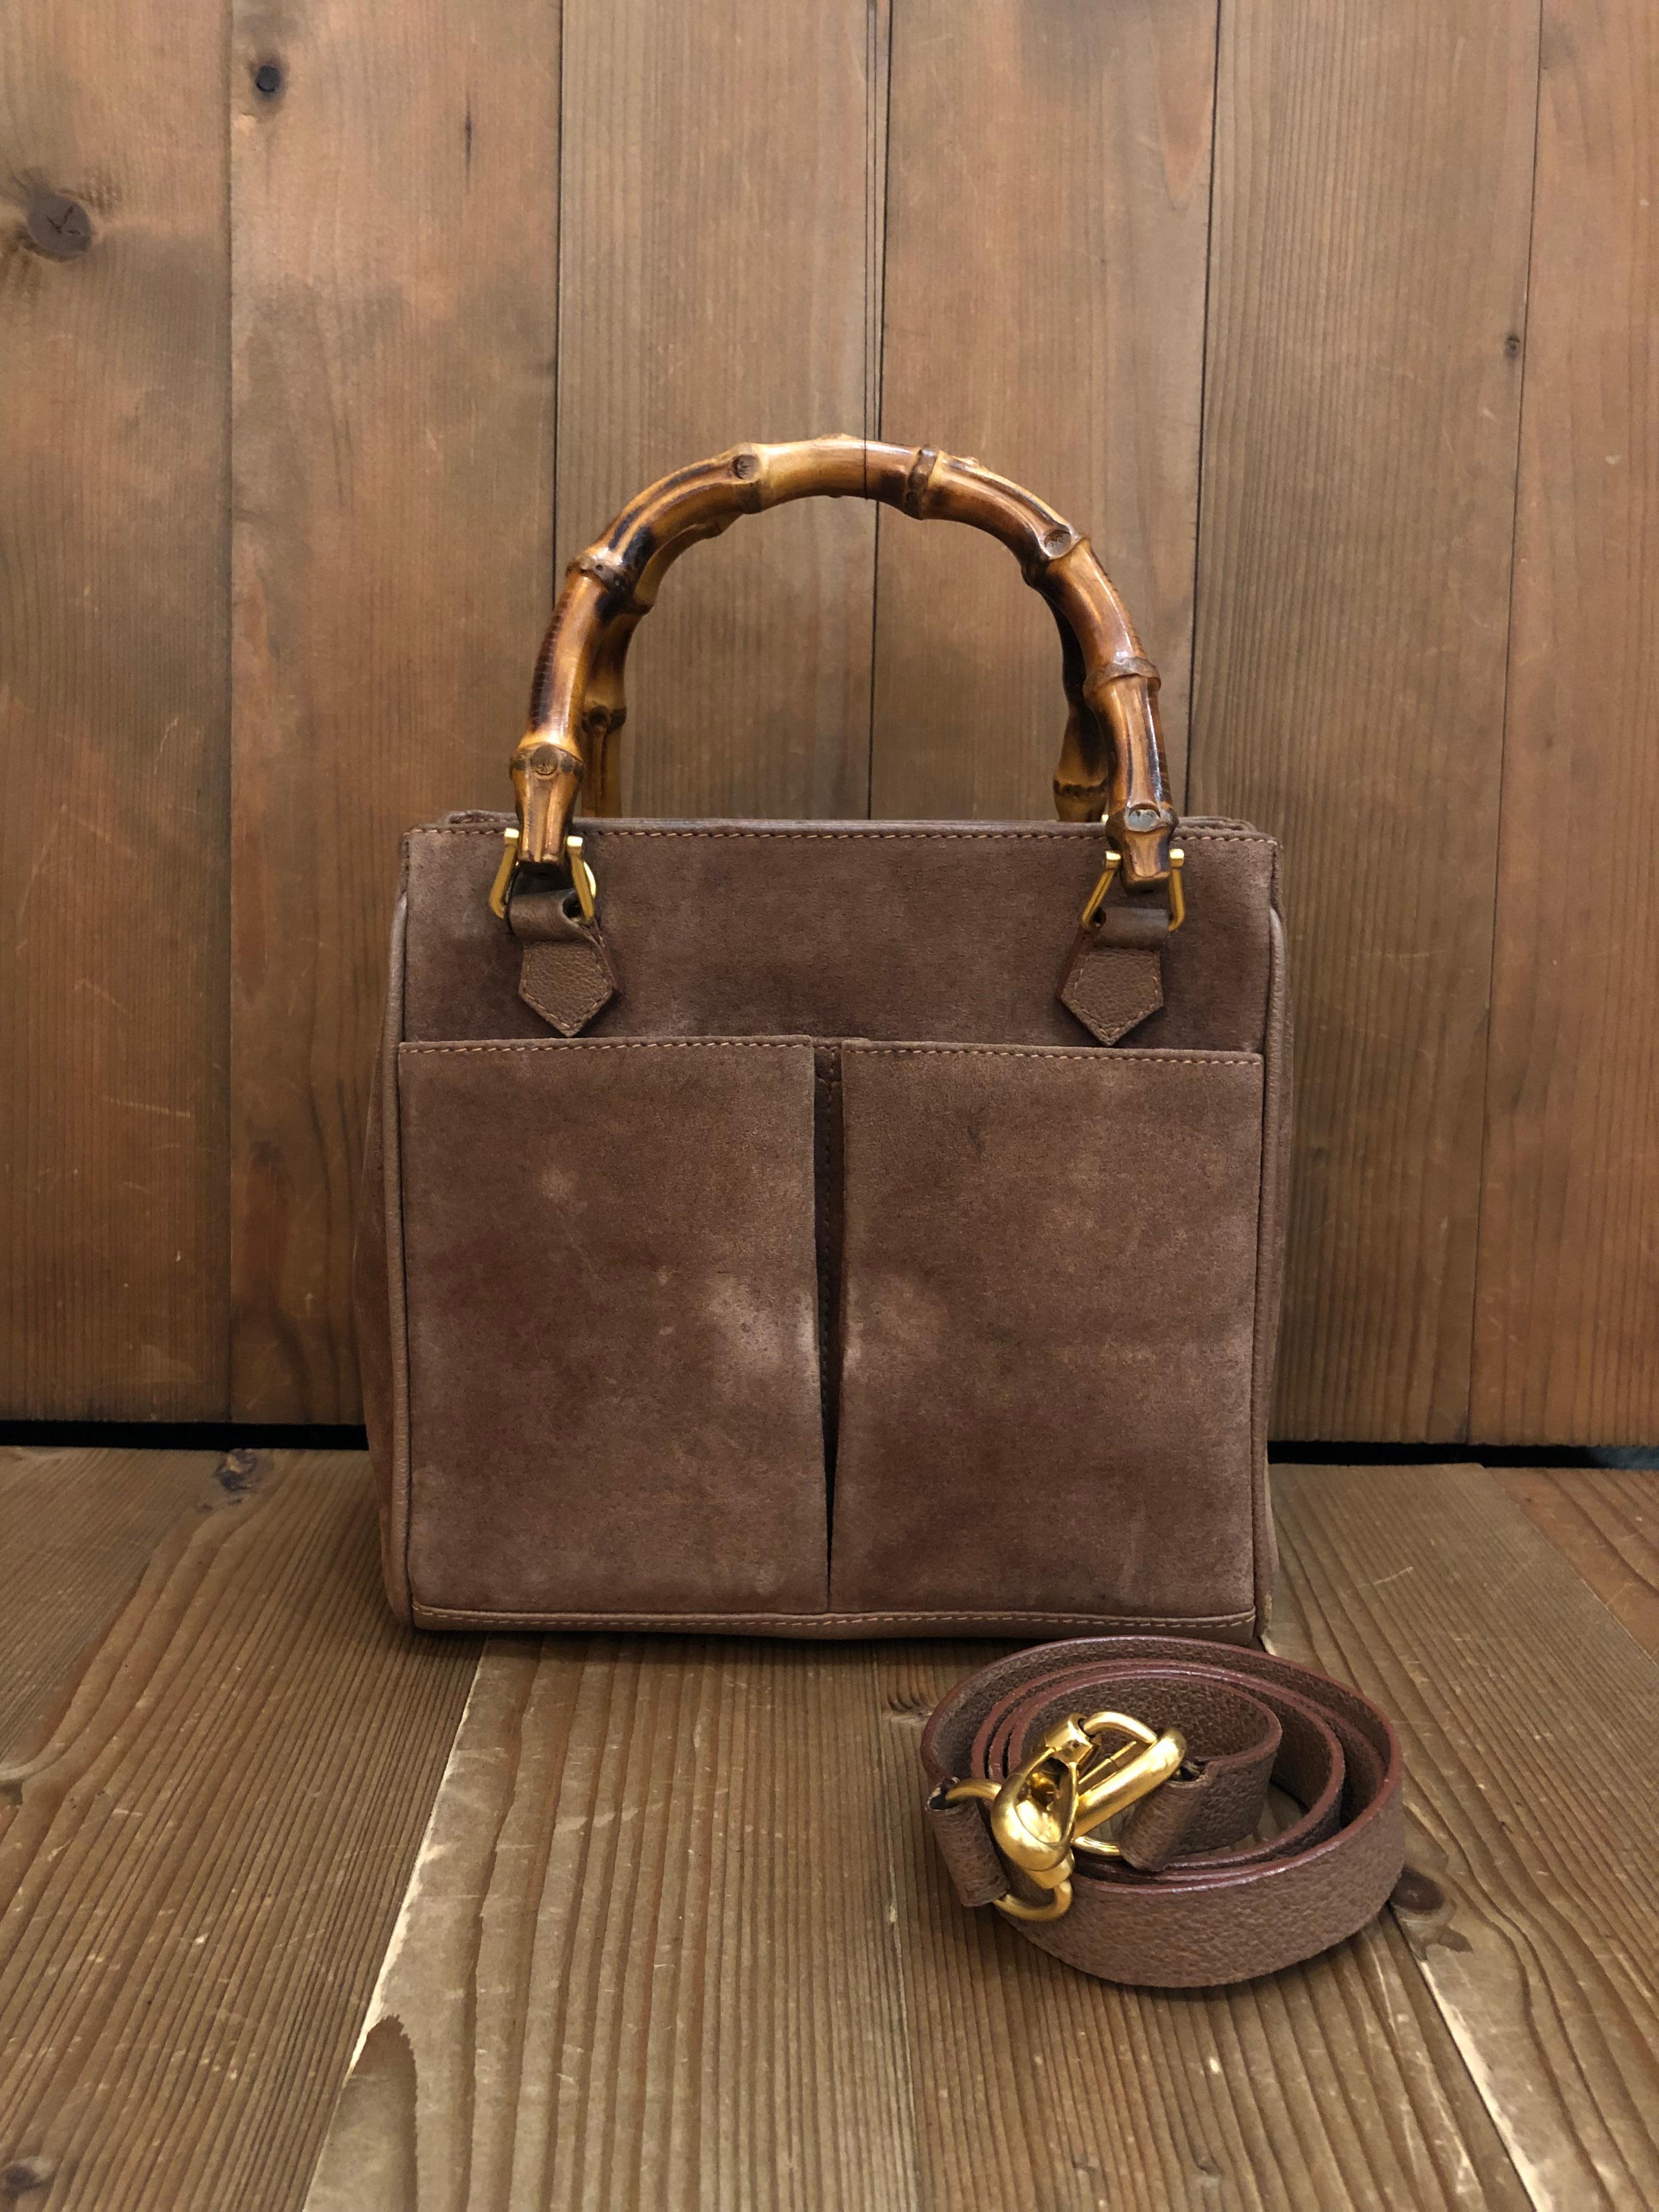 This vintage GUCCI 2-way bamboo crossbody bag is crafted of pigskins and nunuck leather in brown featuring matte gold toned hardware and bamboo handles. The front of this bag features two open pockets lined with diamanté jacquard. Top magnetic snap